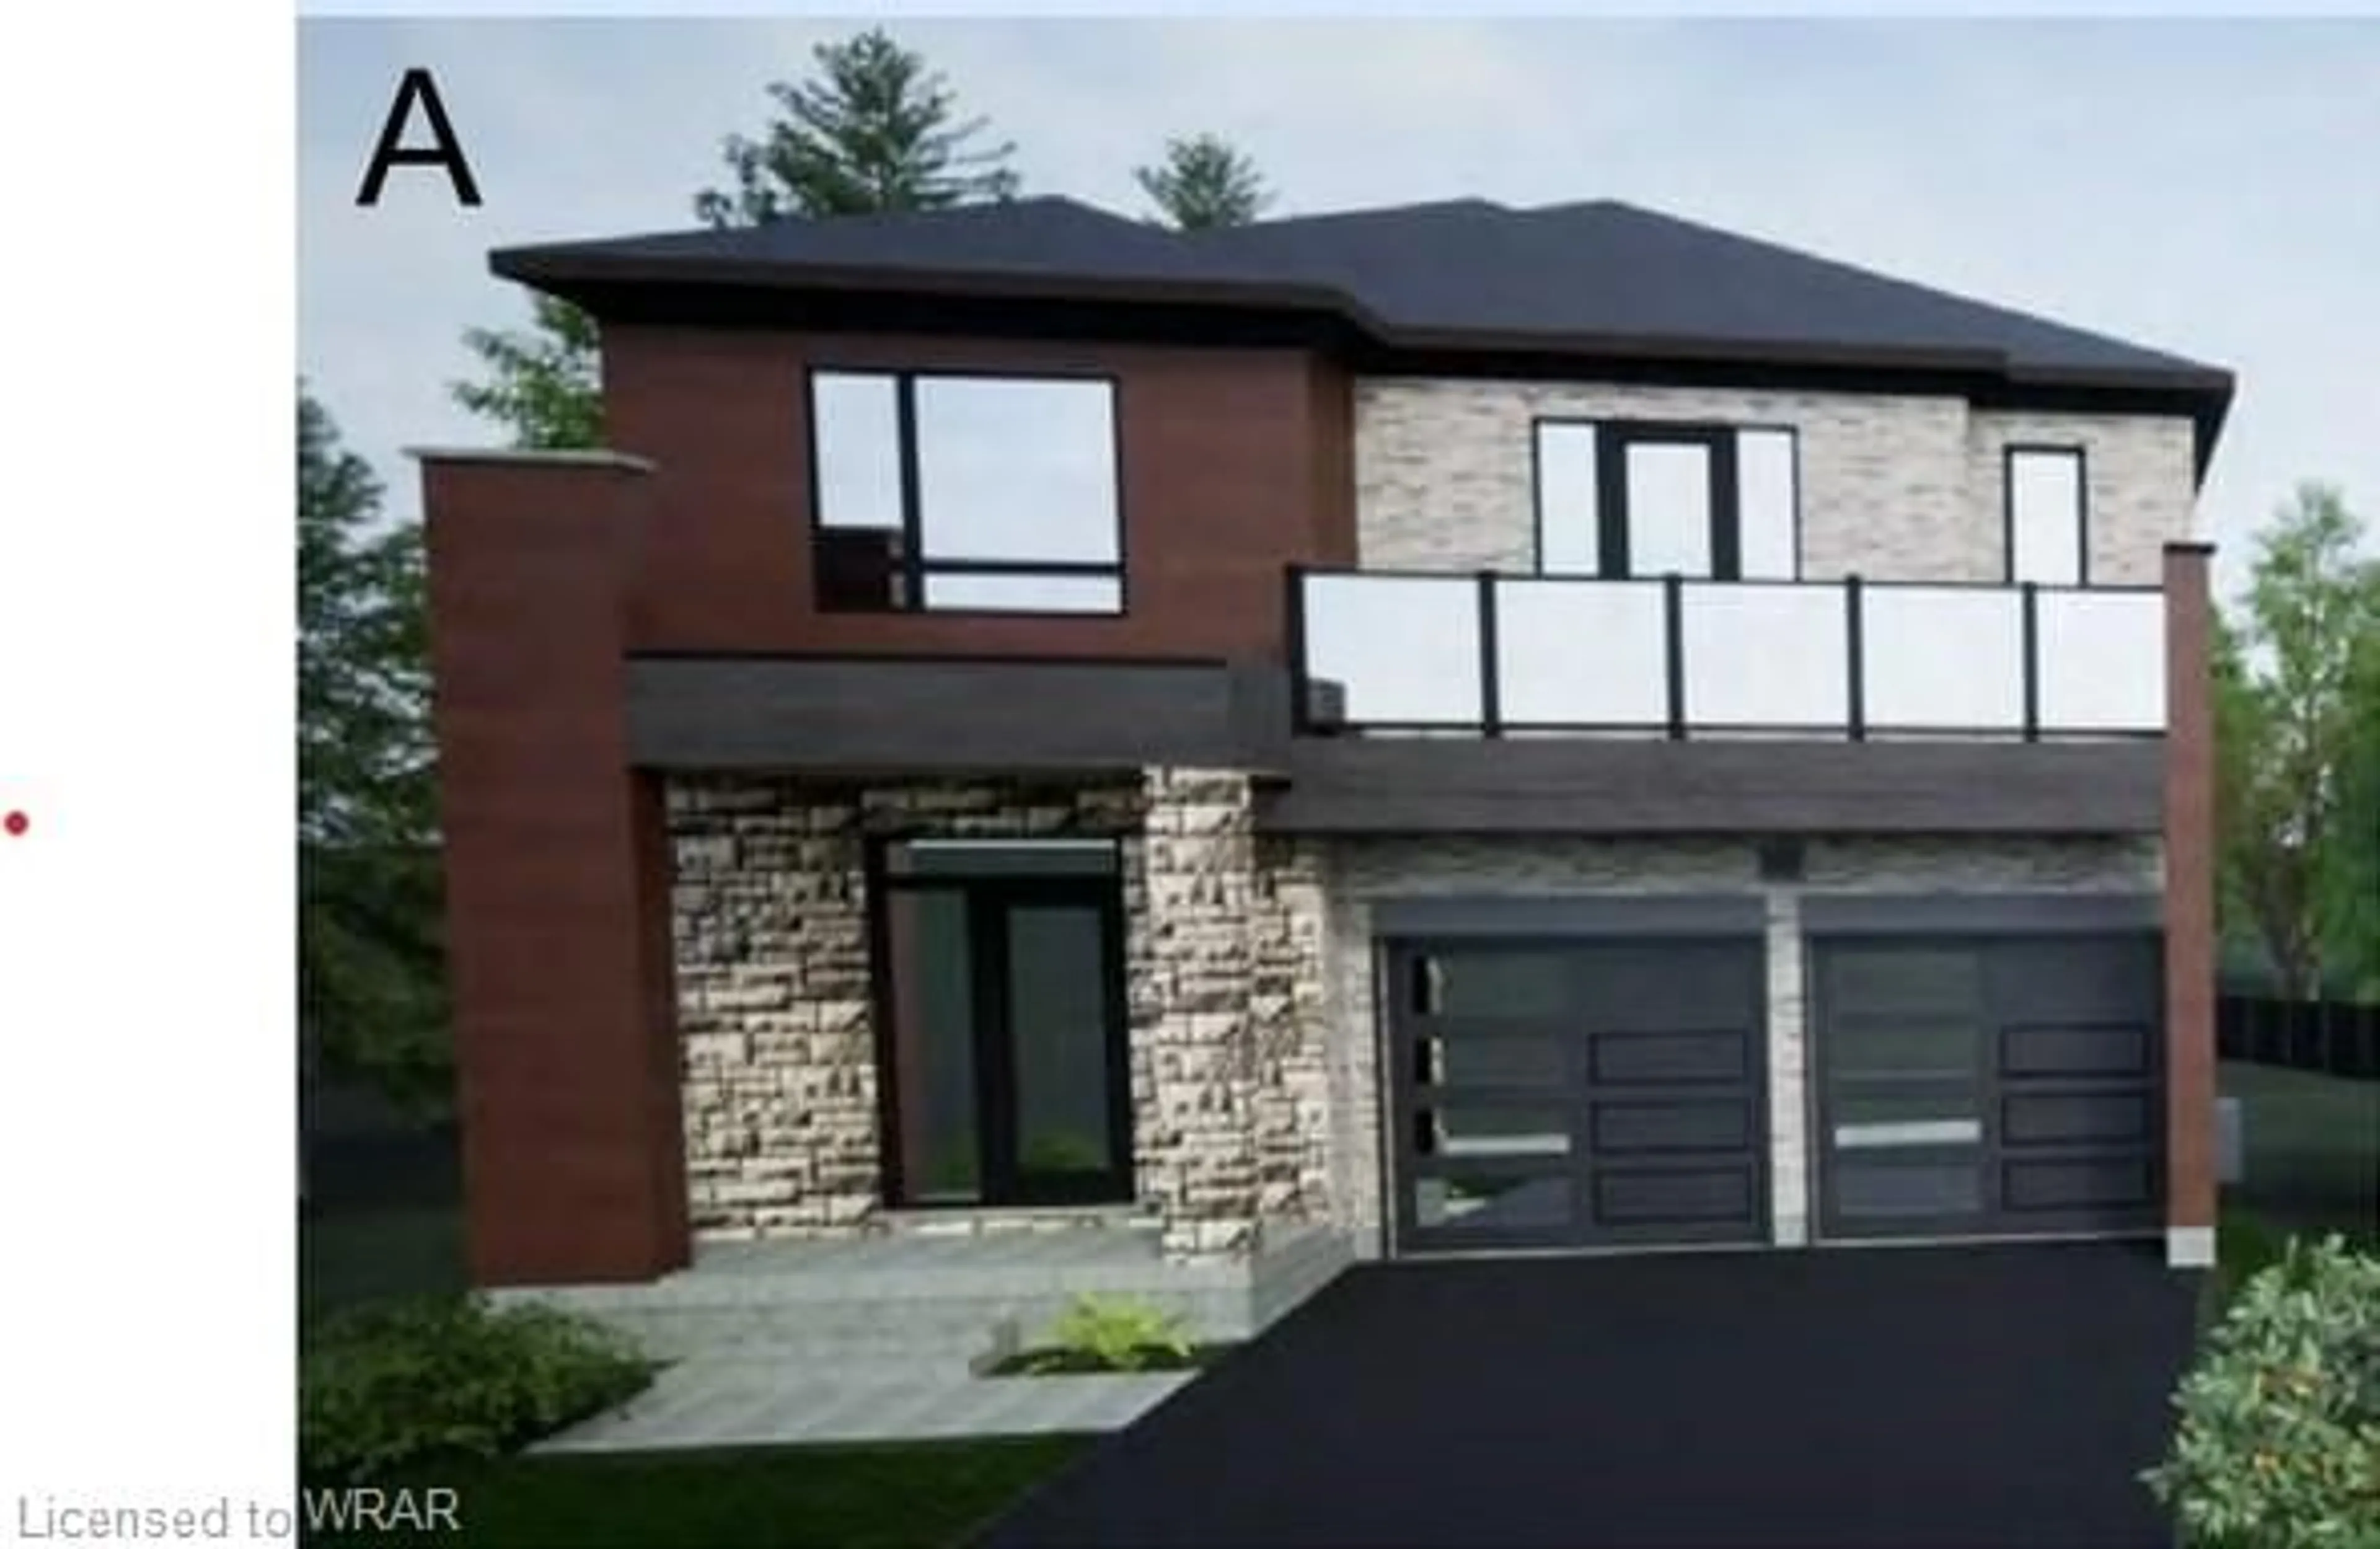 Home with brick exterior material for 228 Freure Dr, Cambridge Ontario N1S 0B9